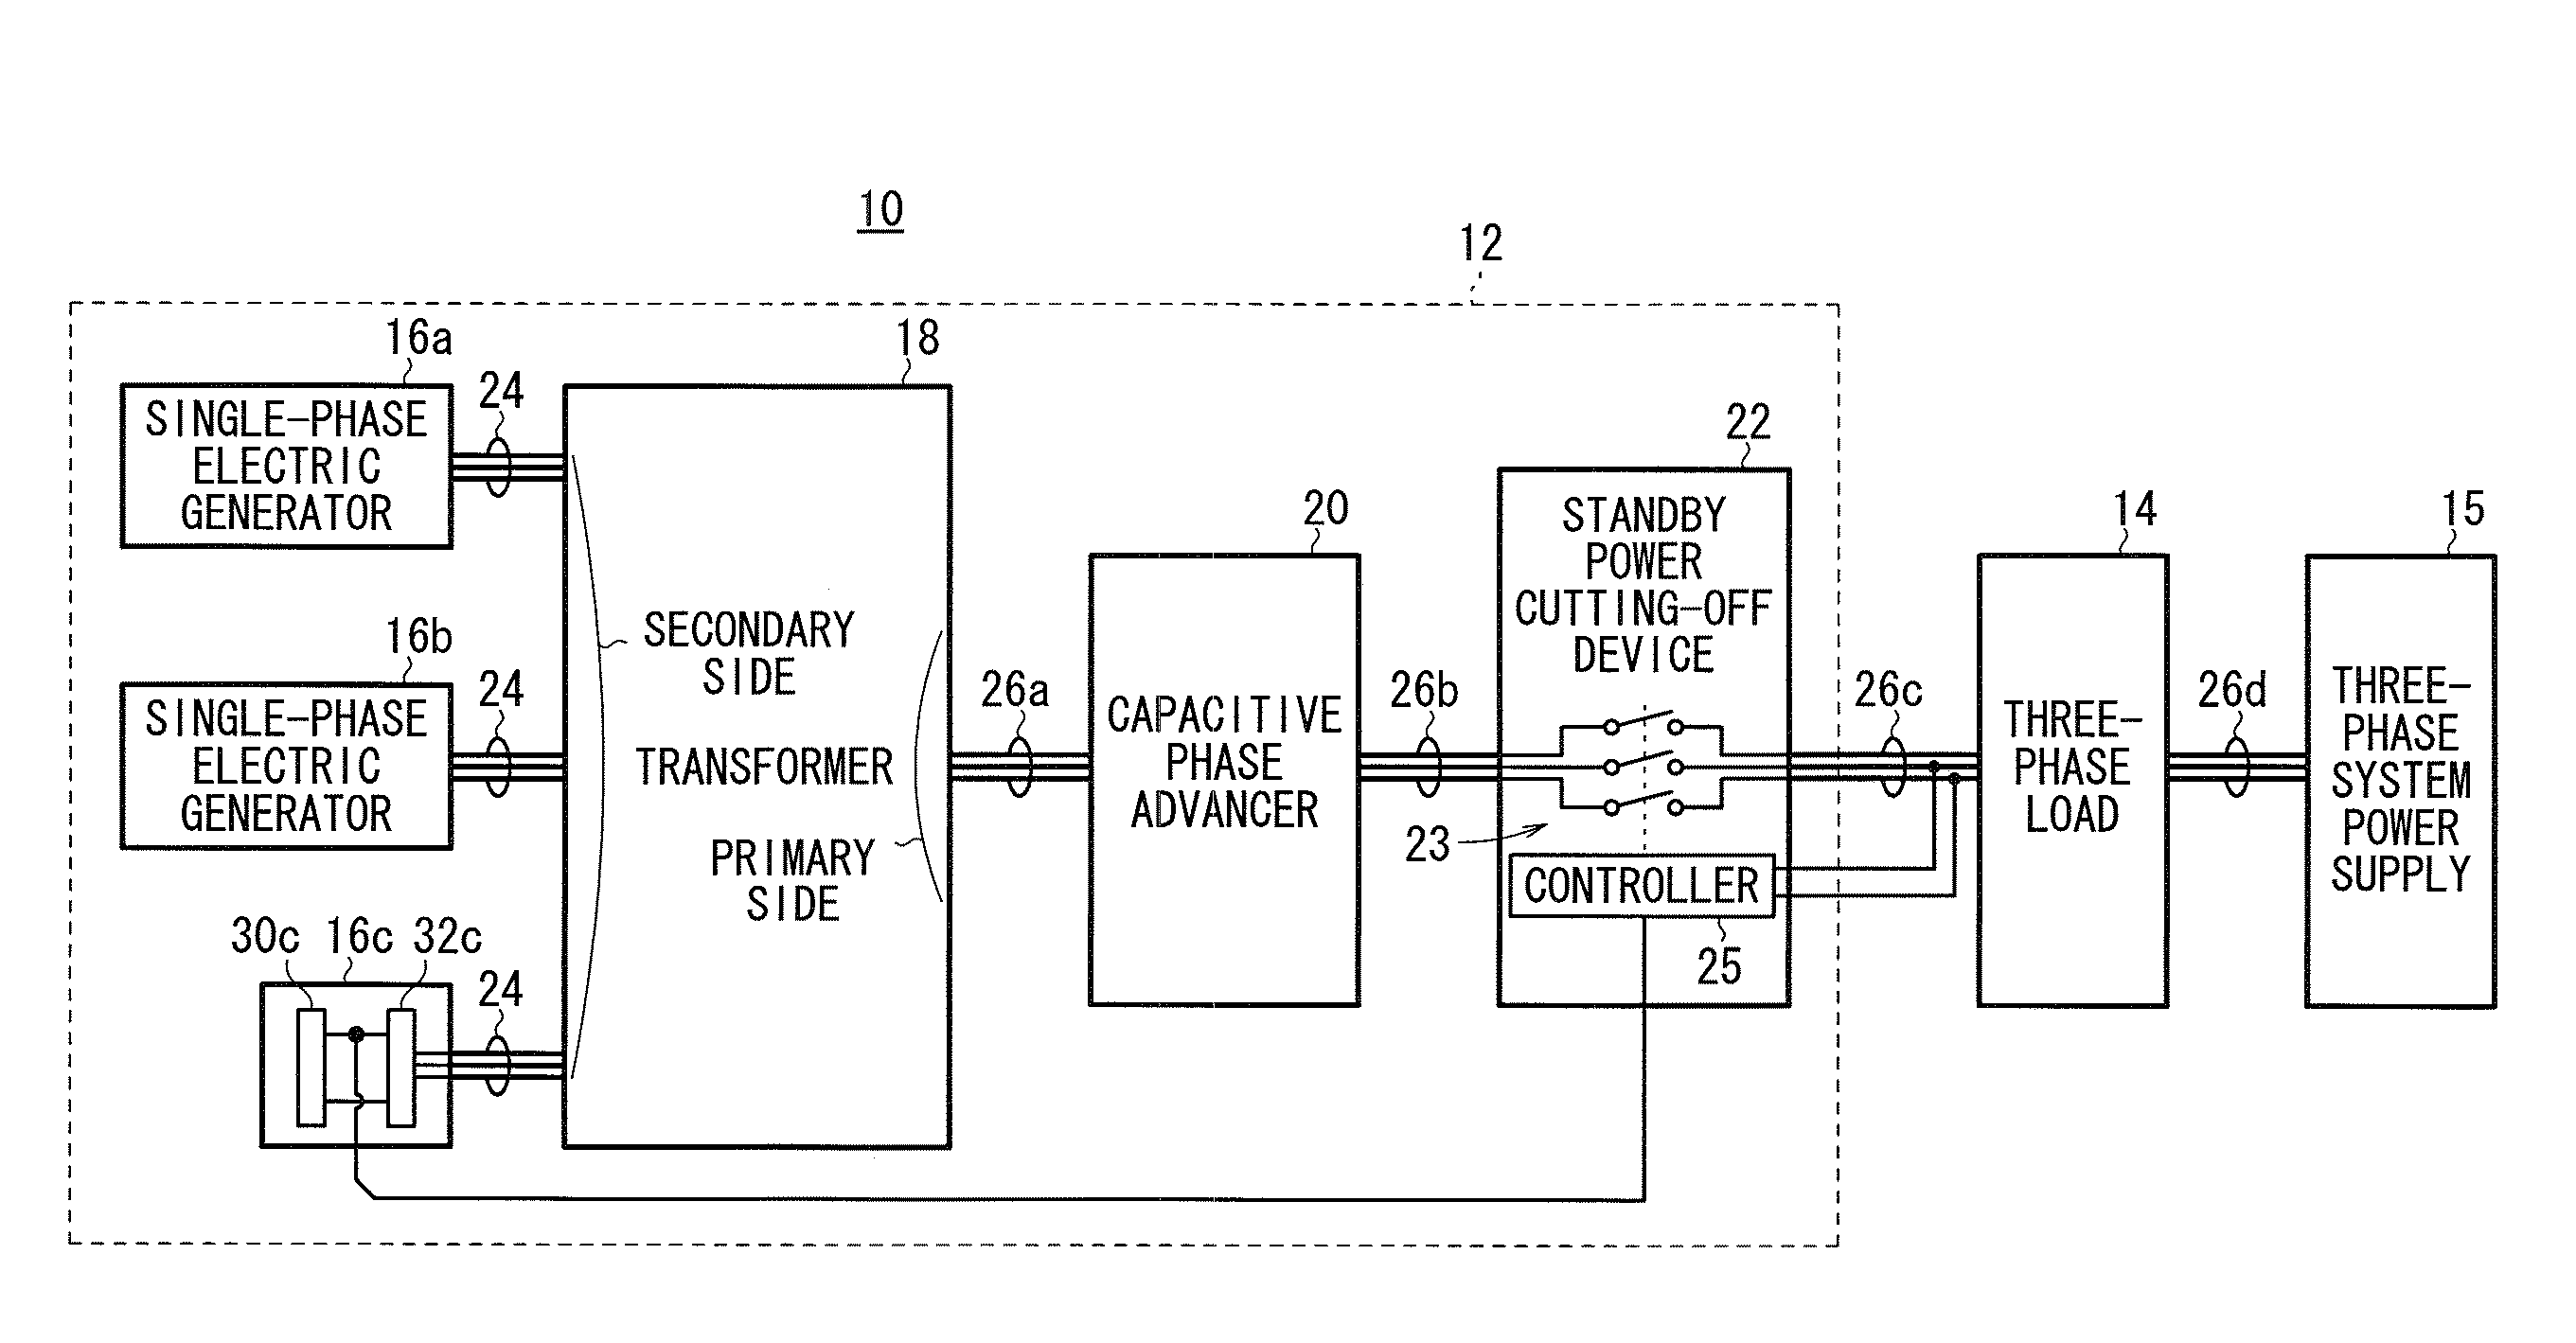 Single-phase to n-phase converter and power conversion system